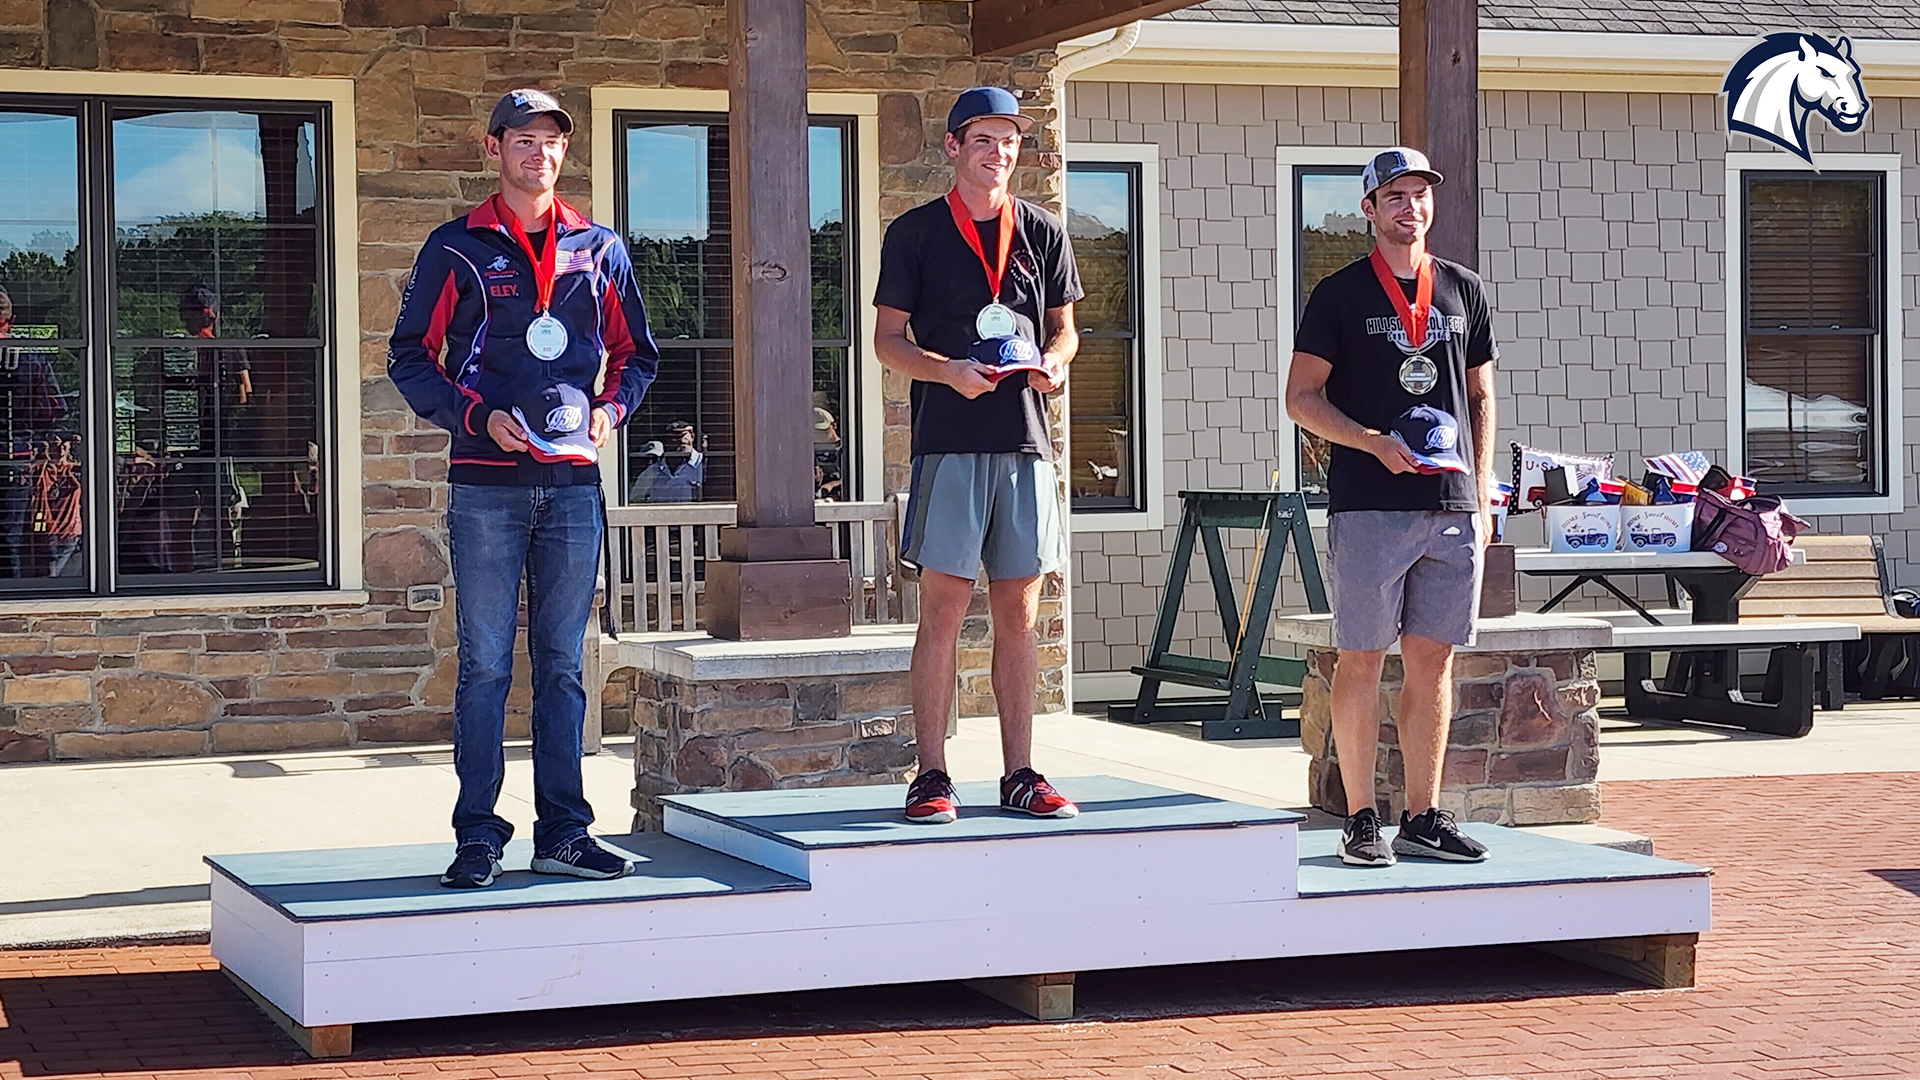 Hillsdale College Shotgun team members medal in USA Shooting Nationals and Junior Olympics